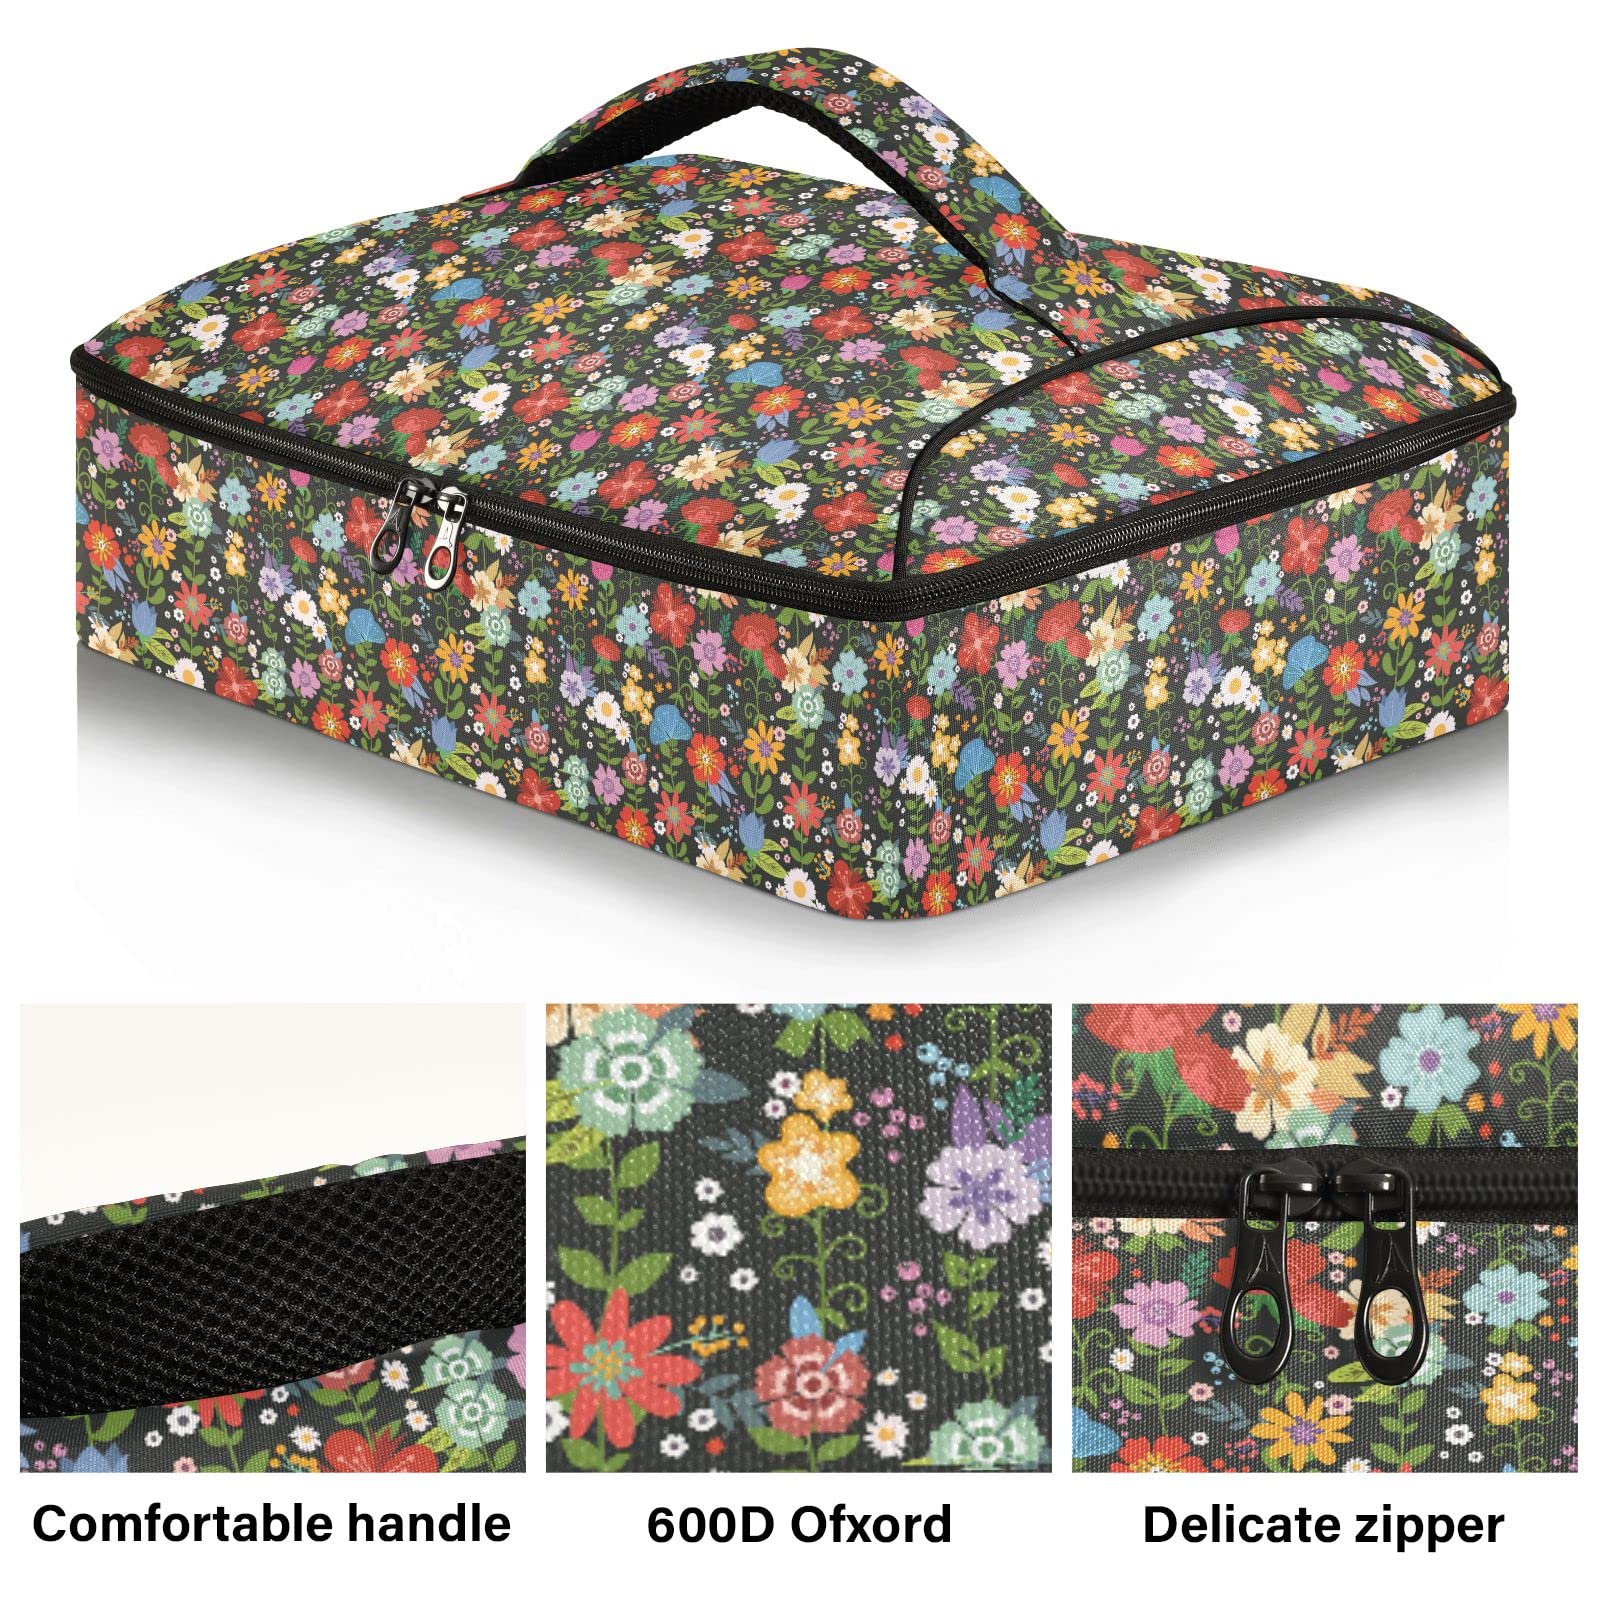 Blooming Flowers Double Insulated Casserole Carrier For Hot or Cold Food, Expandable Hot Food Carrier Bag, Insulated Food Bag for Parties, Beach, Picnic, Camping